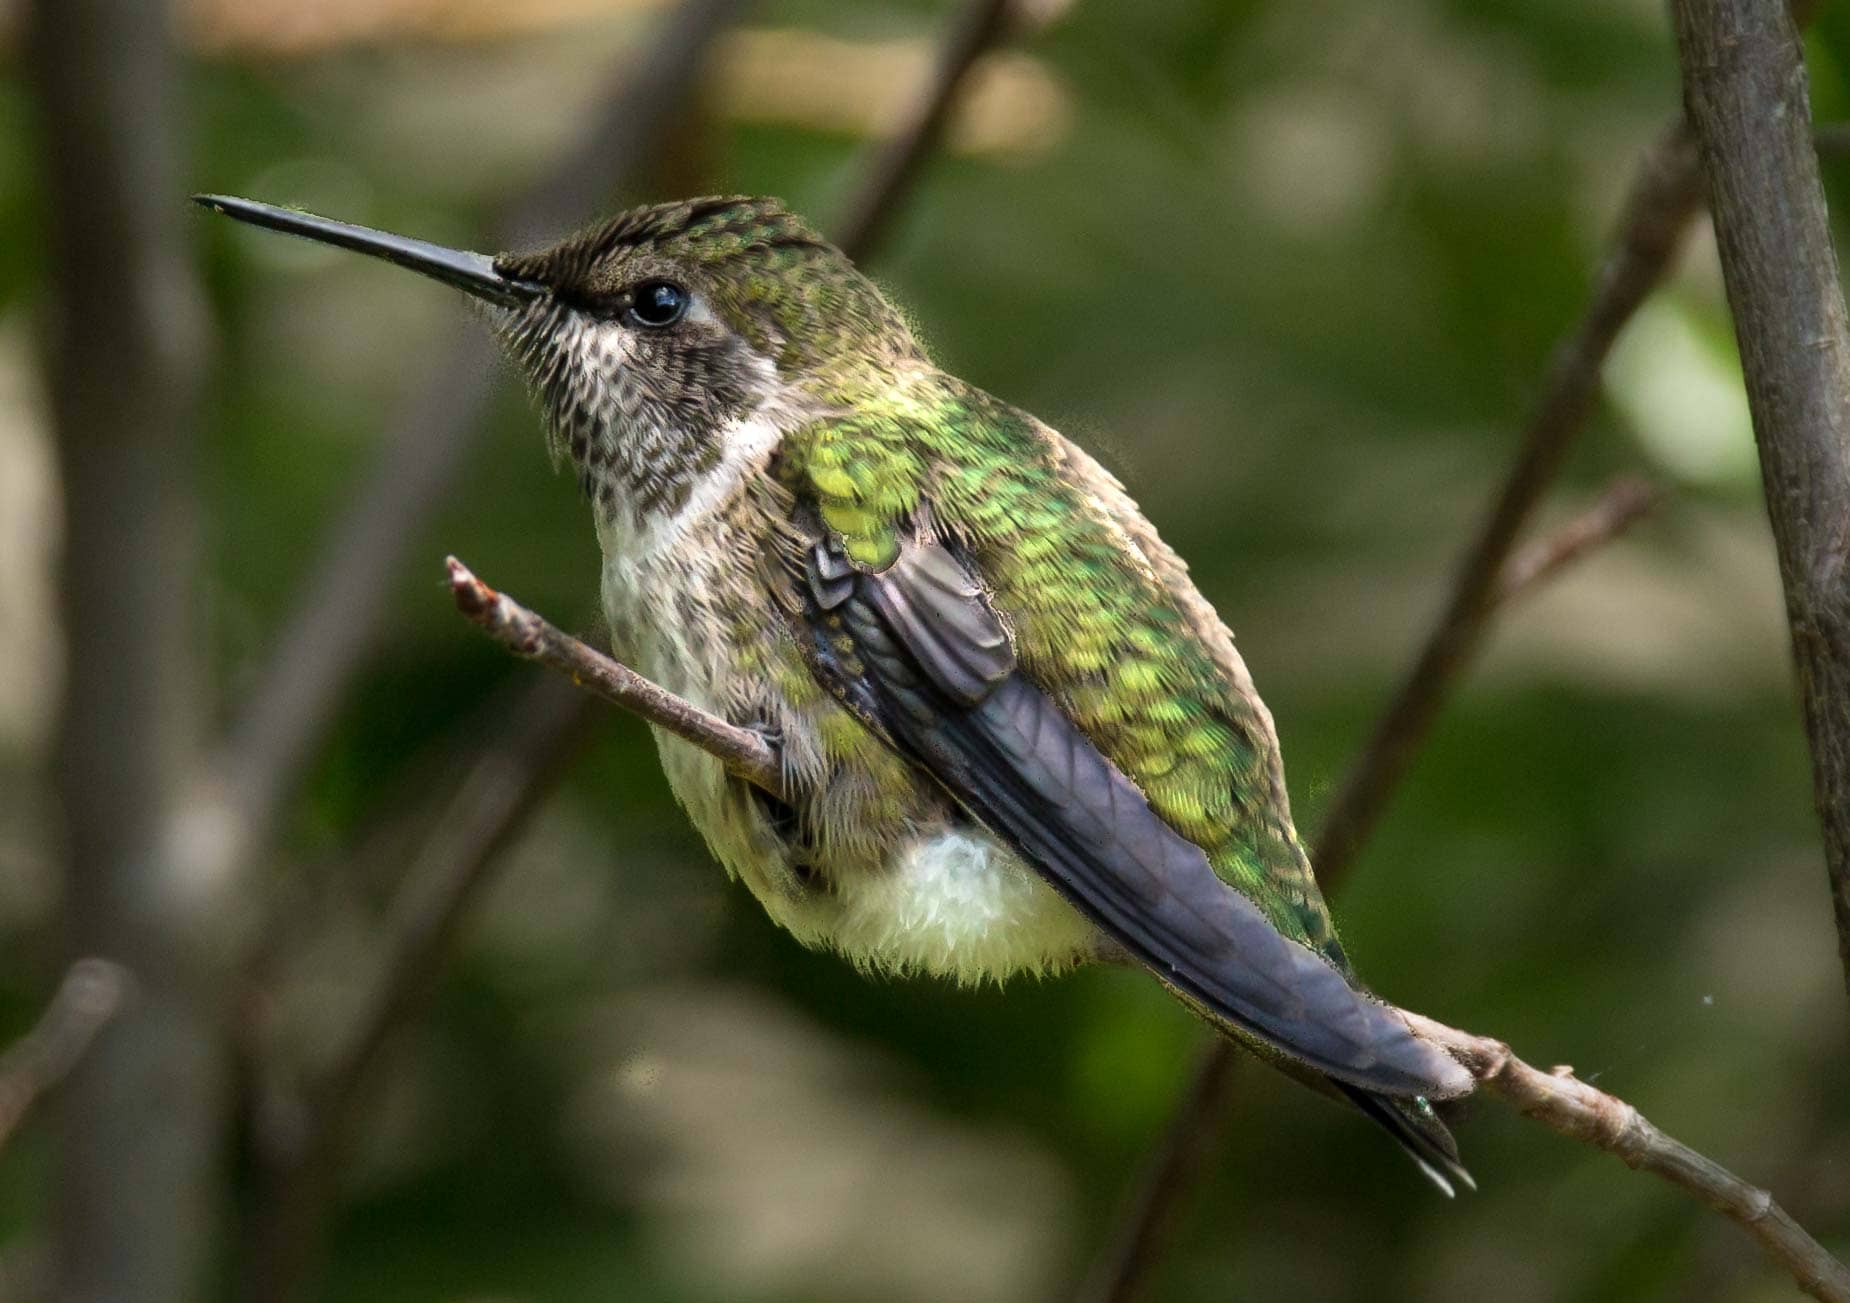 Hummingbird in a native plant garden in Mill Valley, California by Betsey Crawford